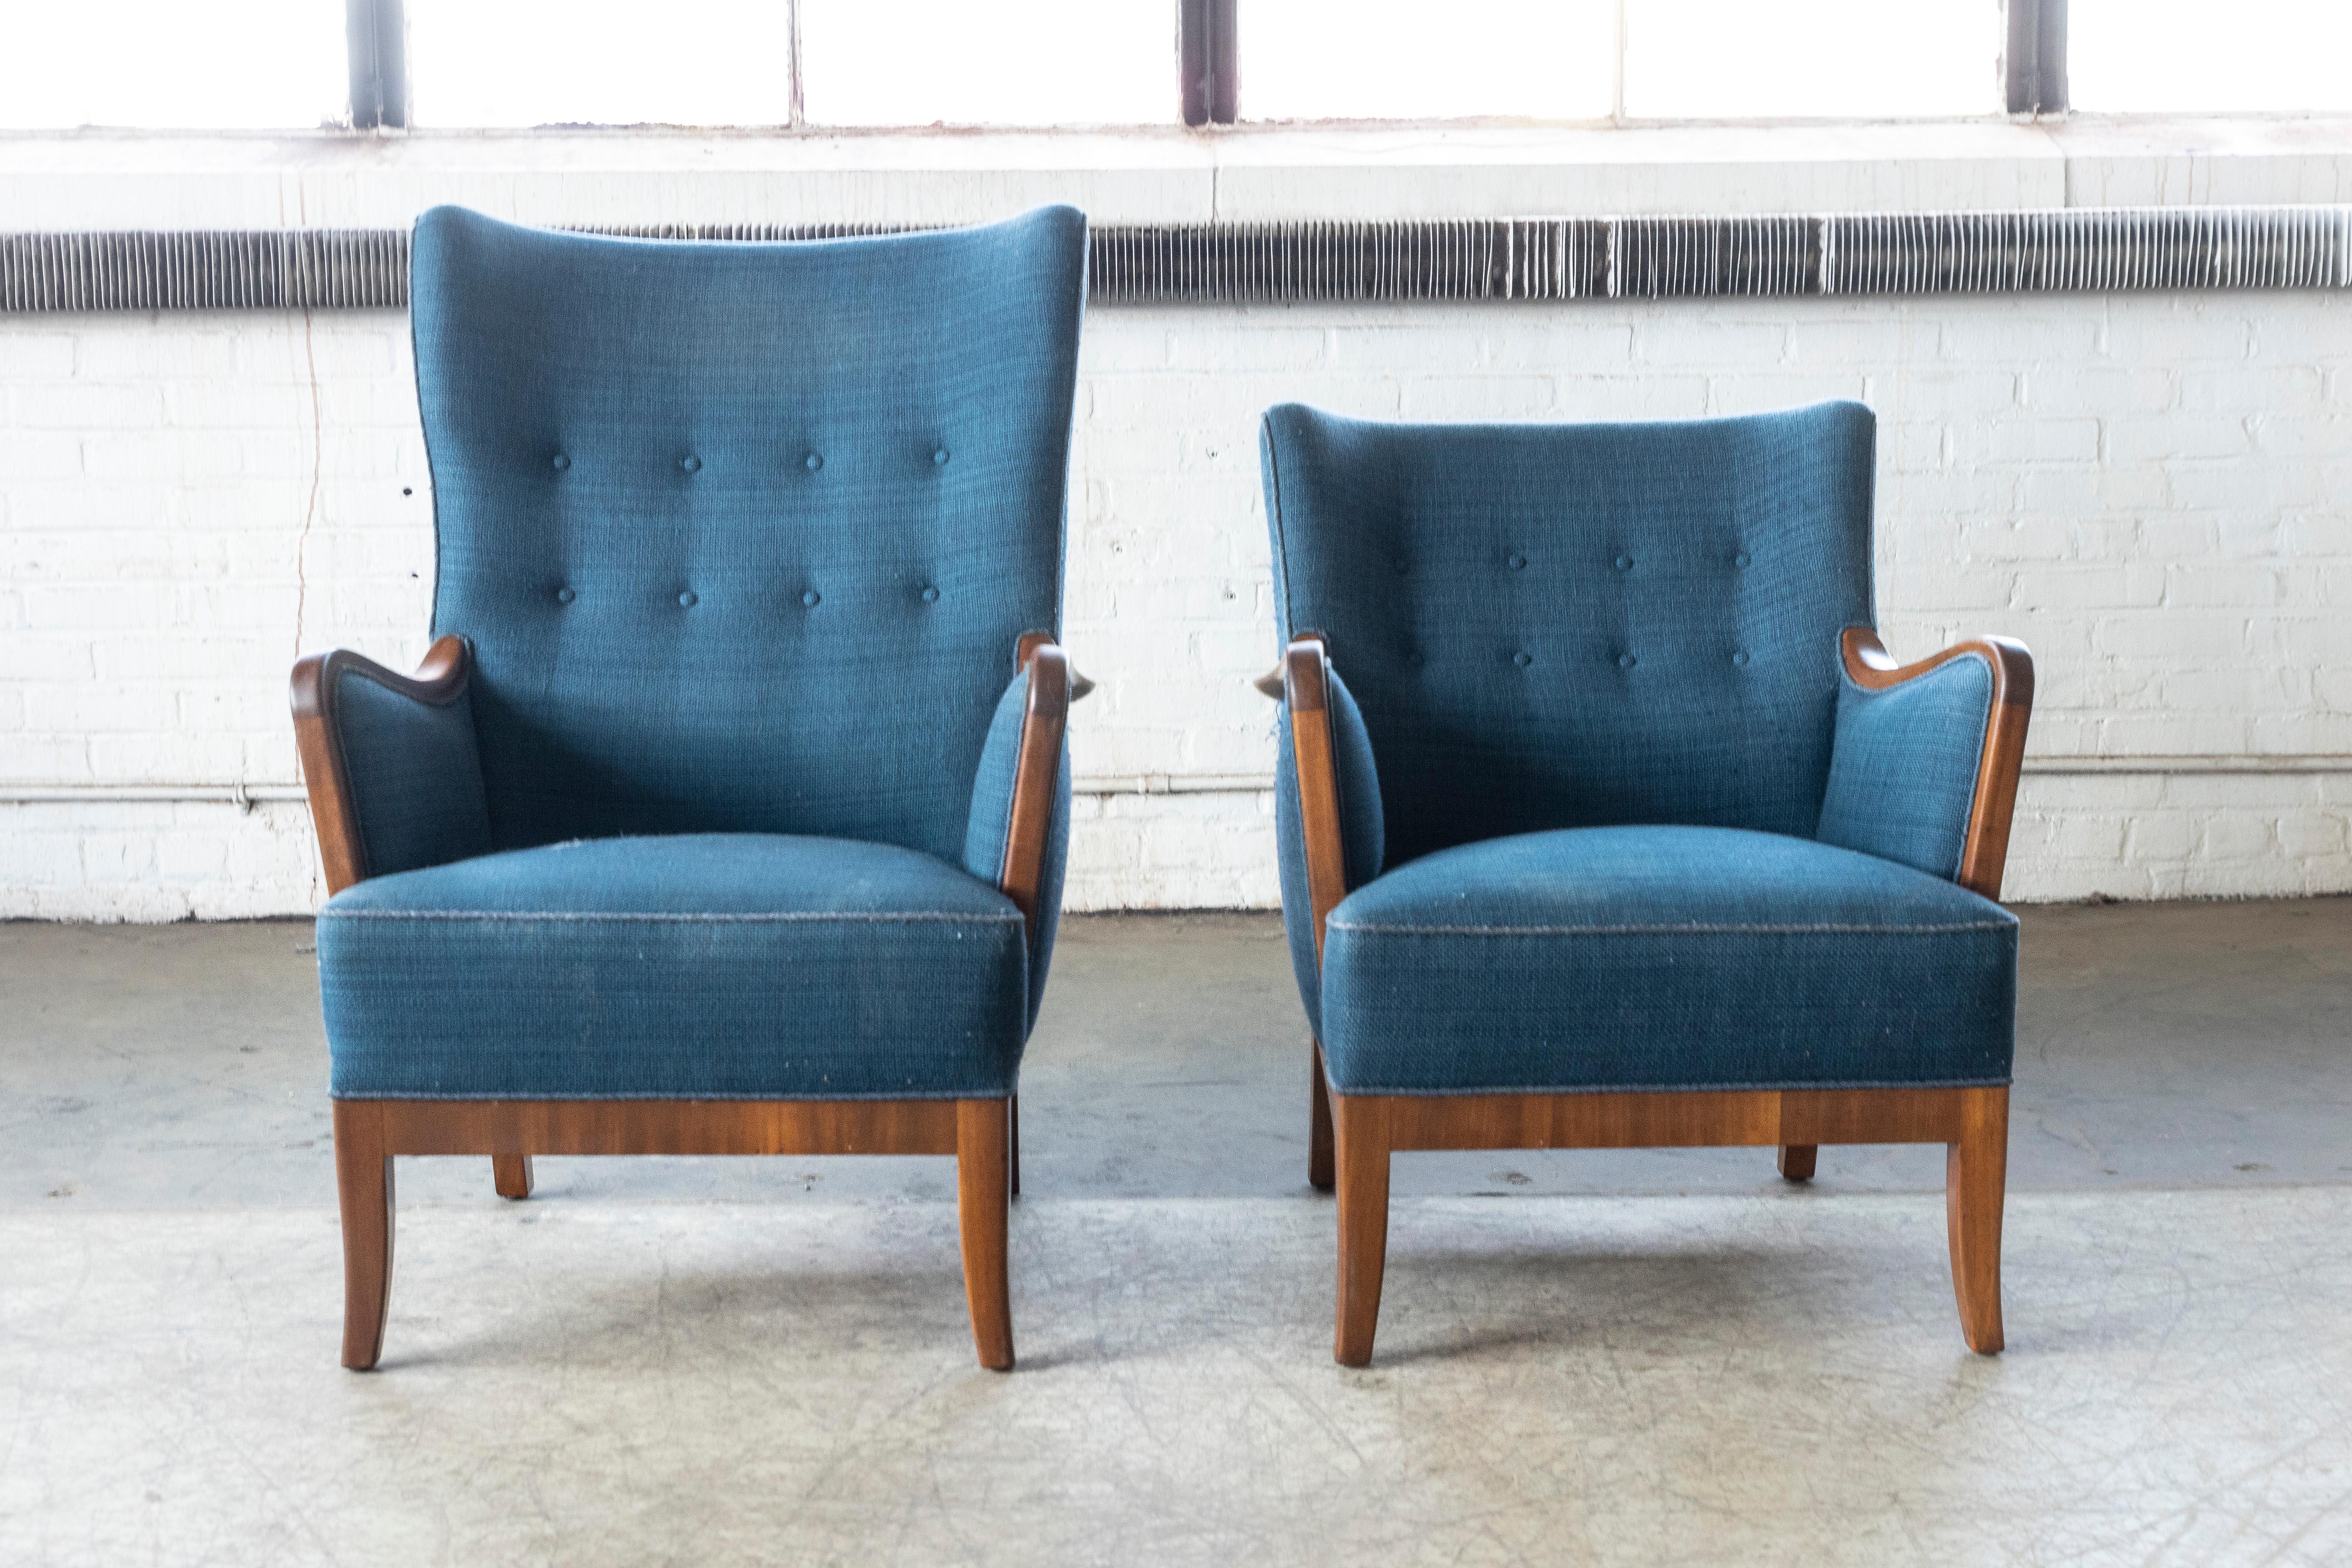 Mid-Century Modern Pair of Danish Midcentury Lounge Chairs with Walnut Frames and Legs